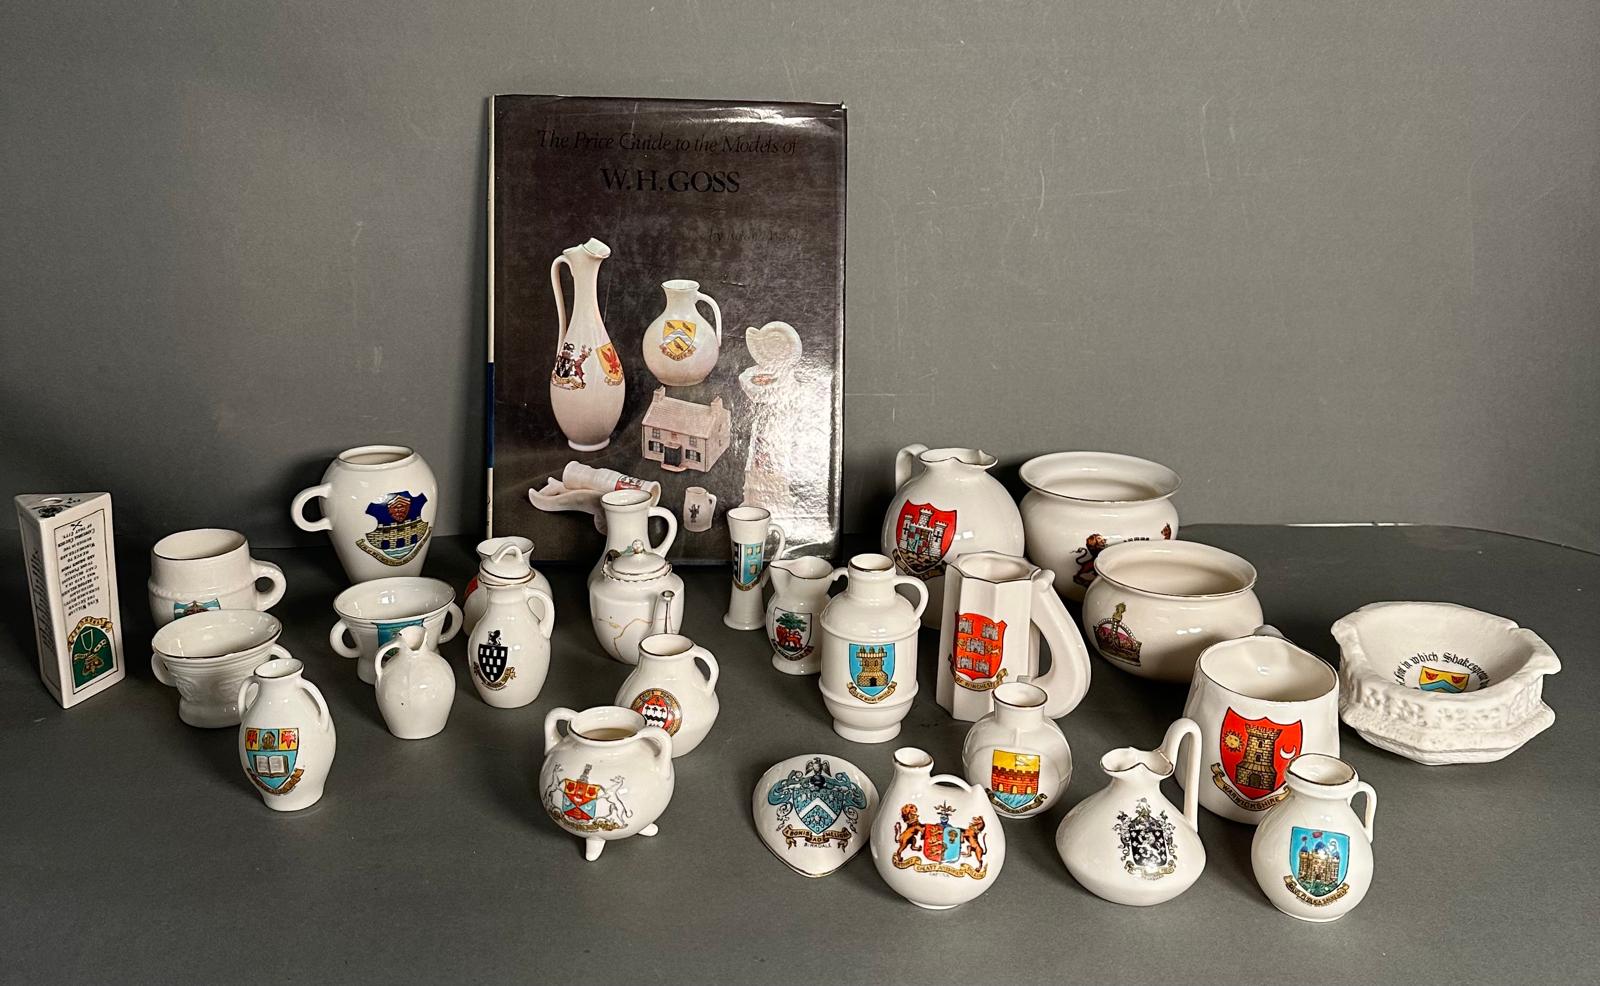 A selection of assorted Goss china and a copy of The Price Guide to the models of V.S.H Goss